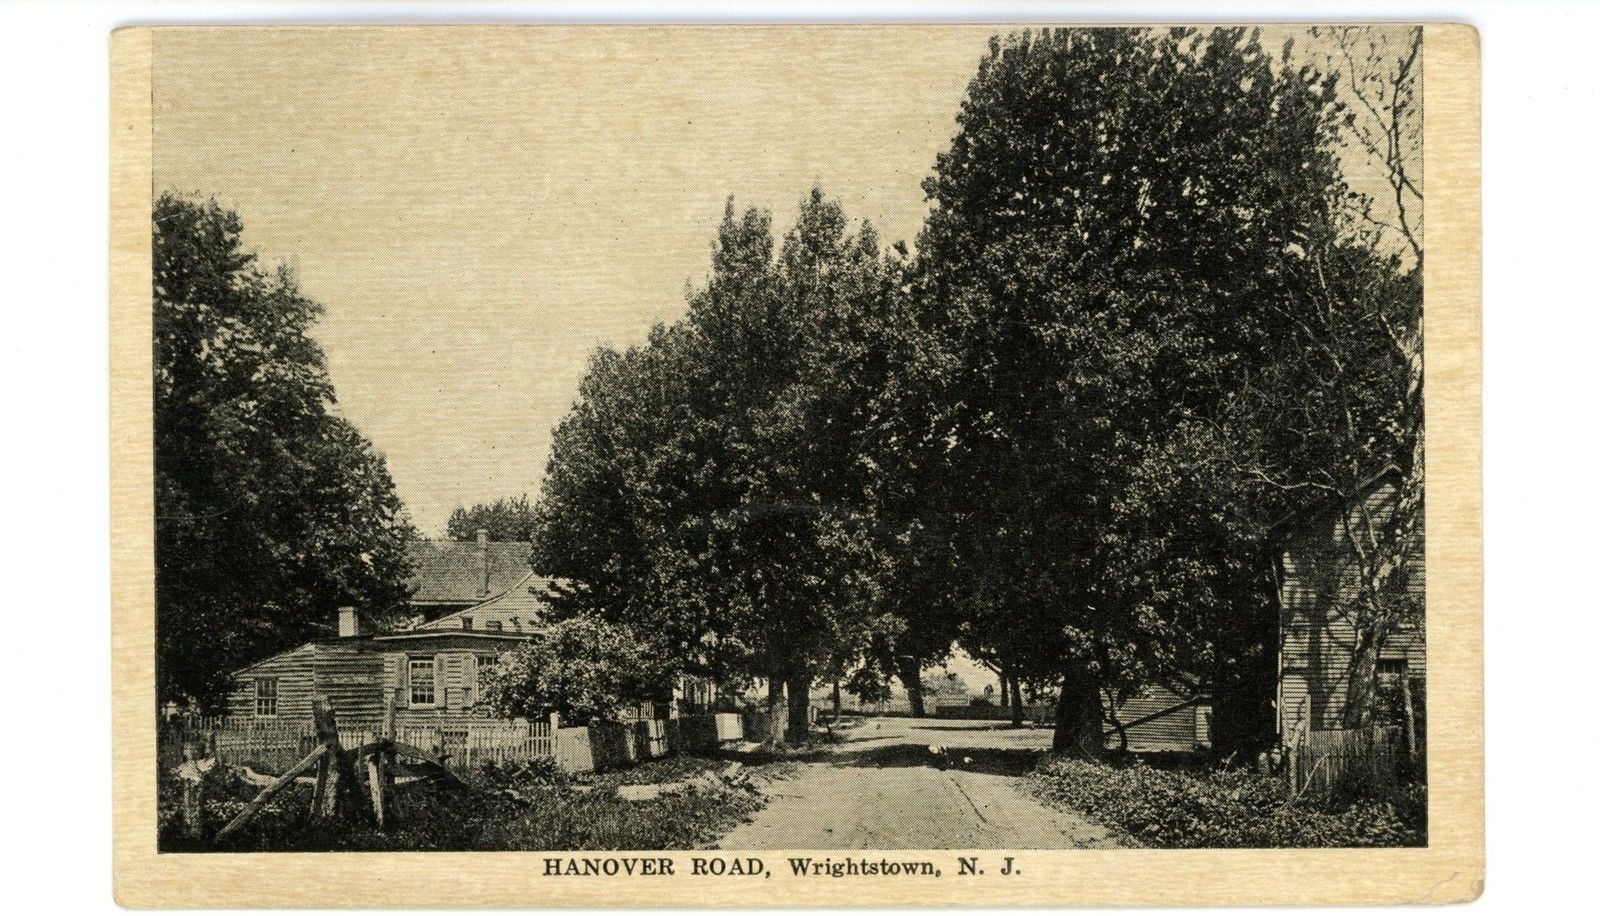 Wrightstown - Hanover Road - 1910s or 20s